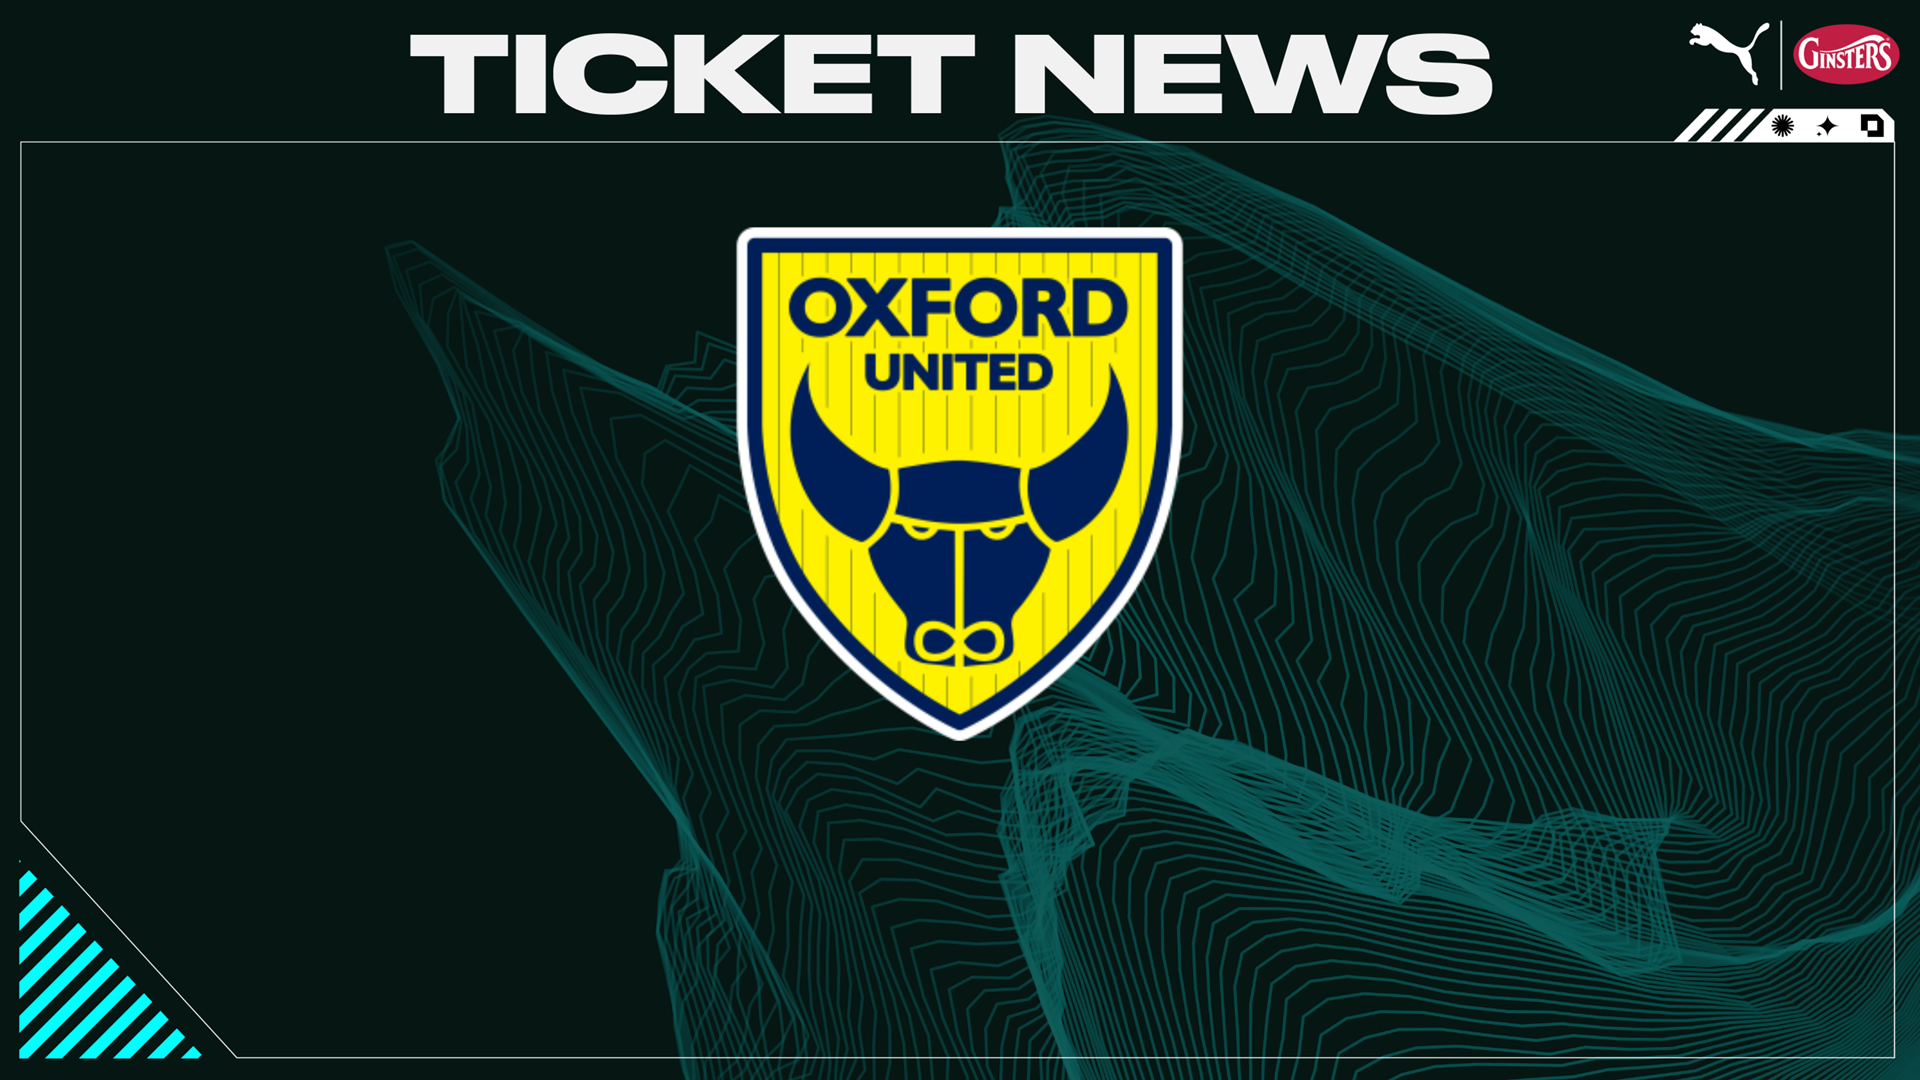 Oxford United tickets